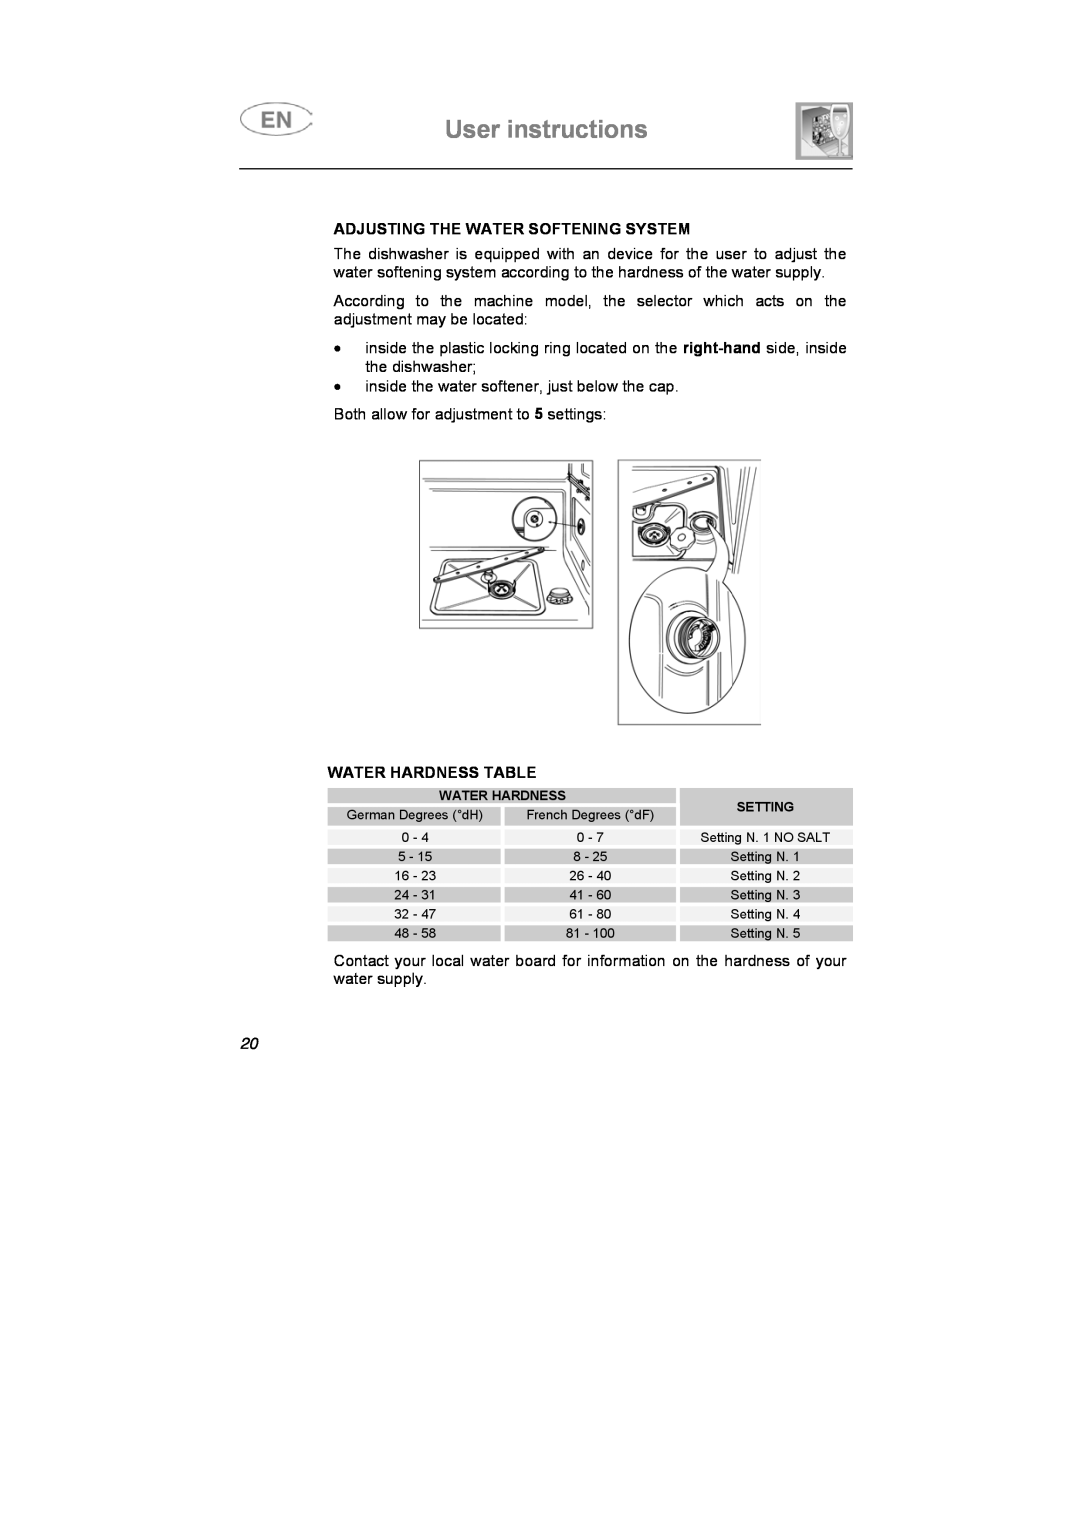 Smeg LSA653E instruction manual User instructions, Adjusting The Water Softening System, Water Hardness Table 